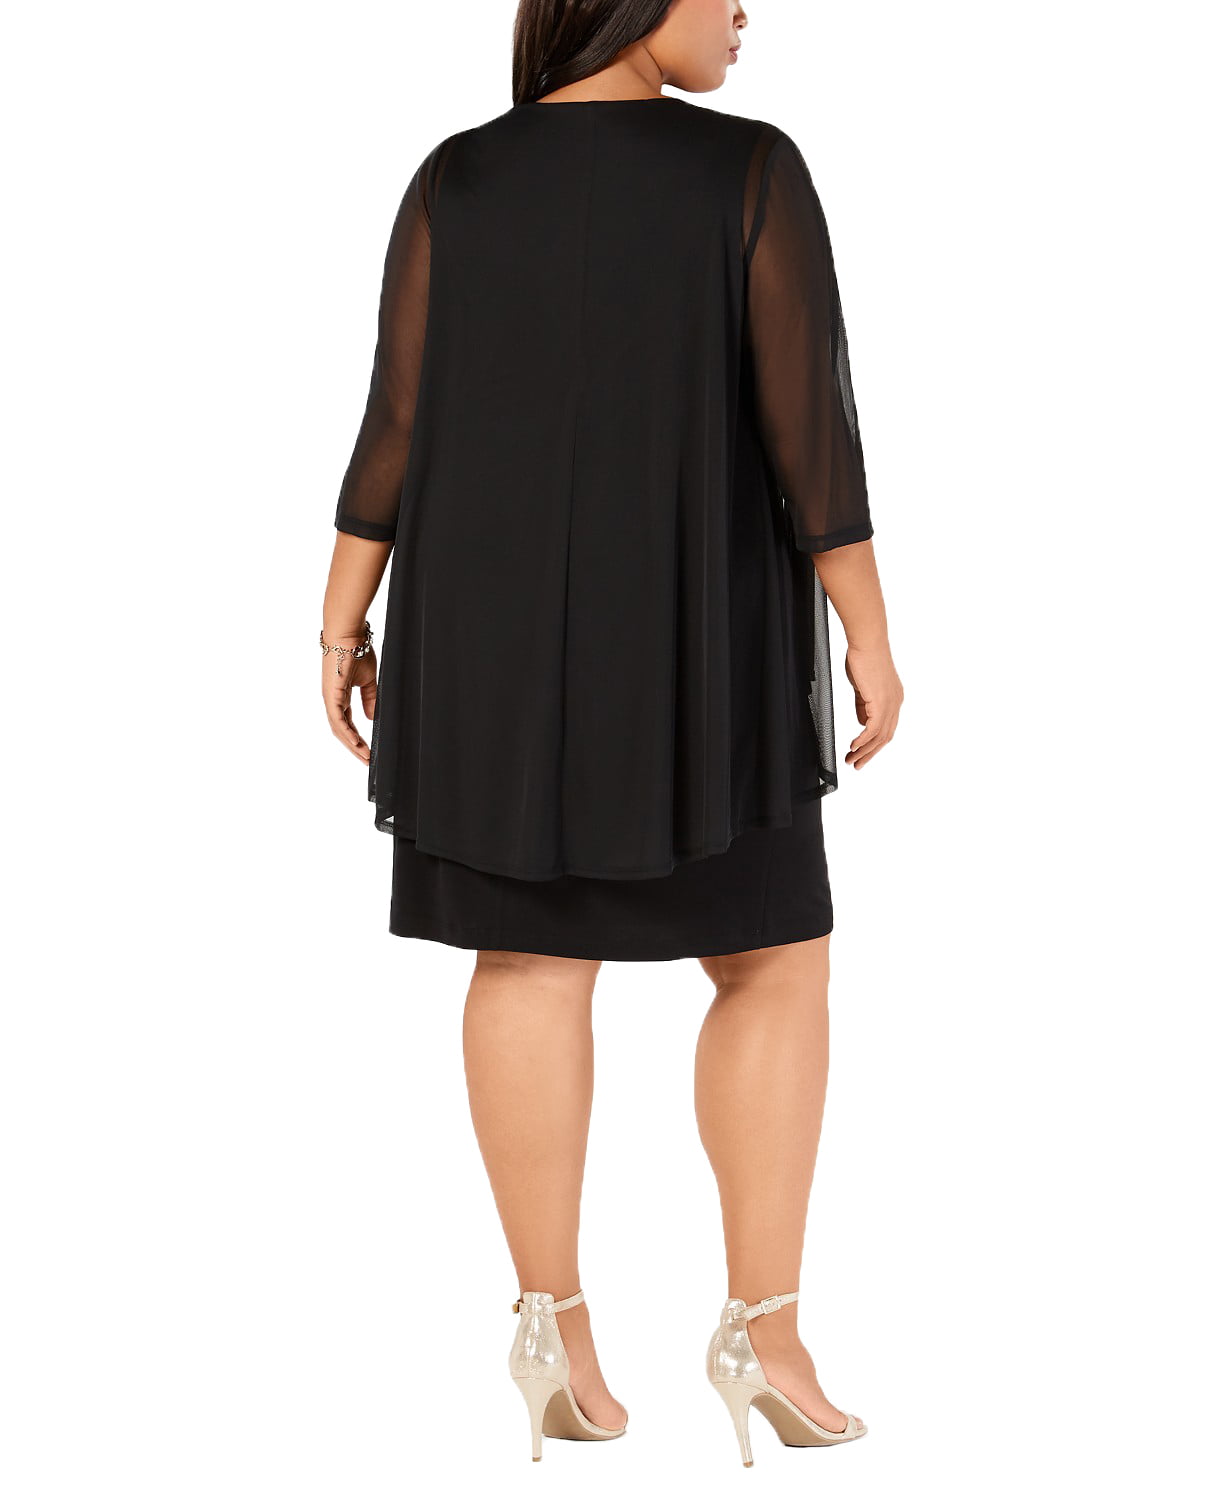 woocommerce-673321-2209615.cloudwaysapps.com-connected-womens-plus-size-black-metallic-embroidered-dress-amp-mock-jacket